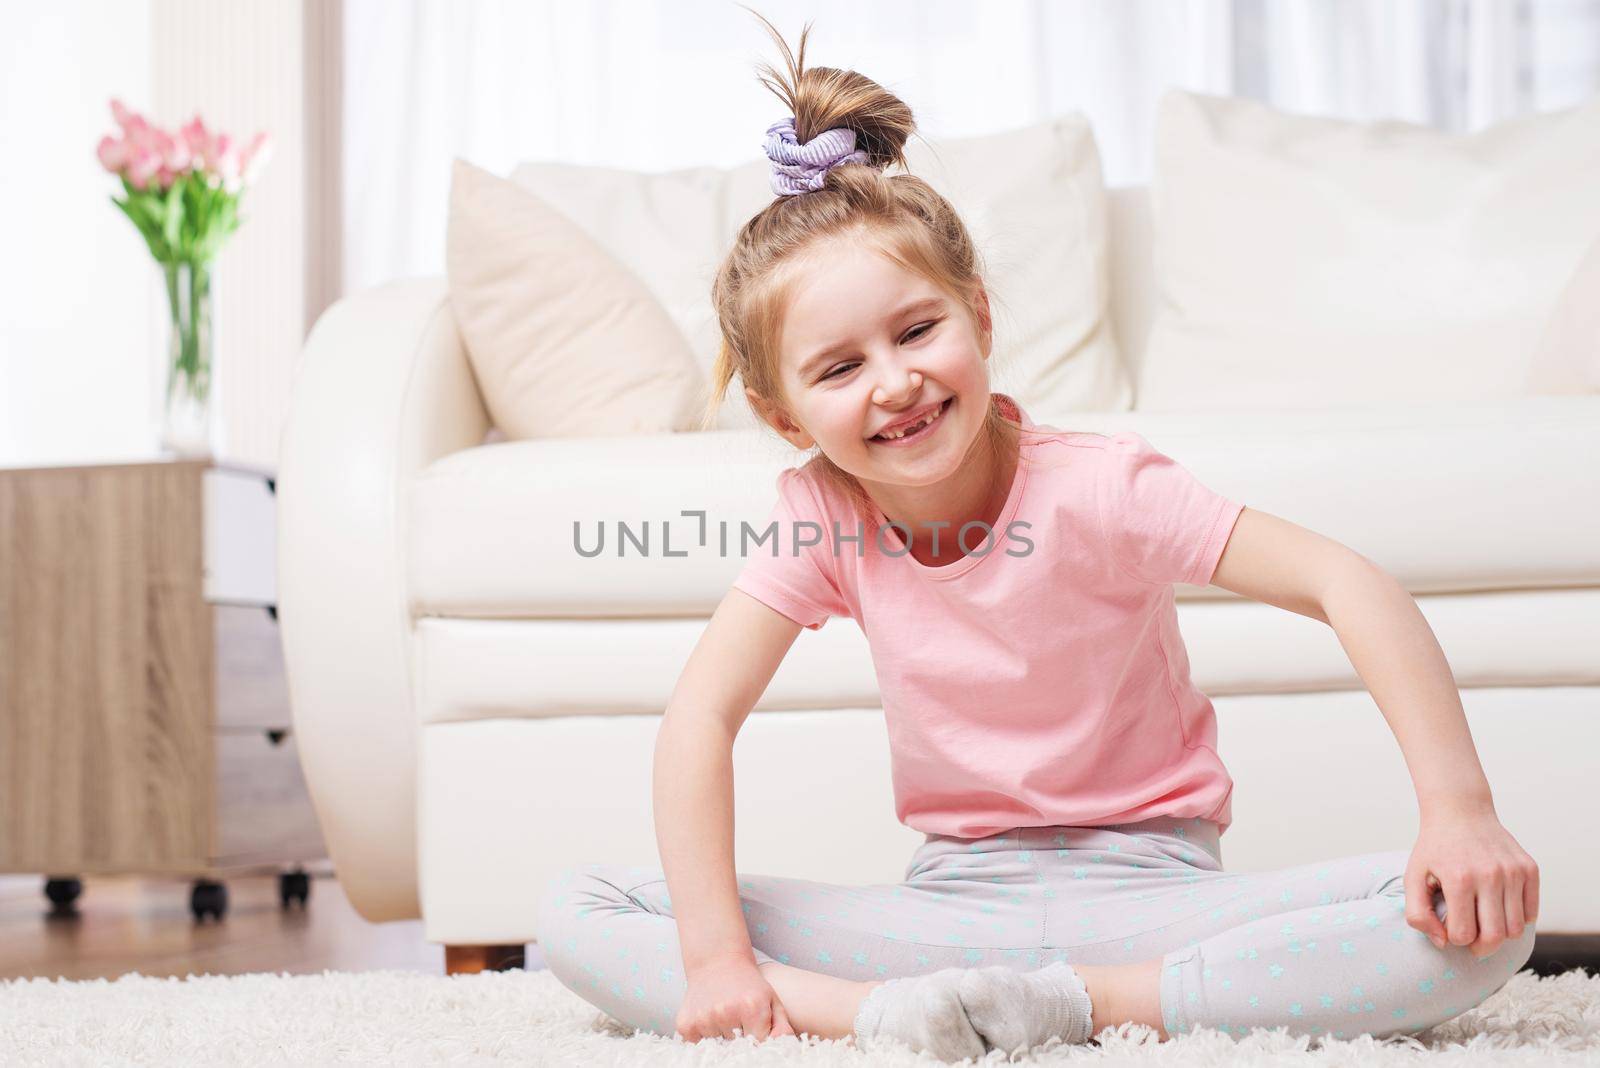 Cutie preteen kid sitting in relaxing yoga pose in bright room